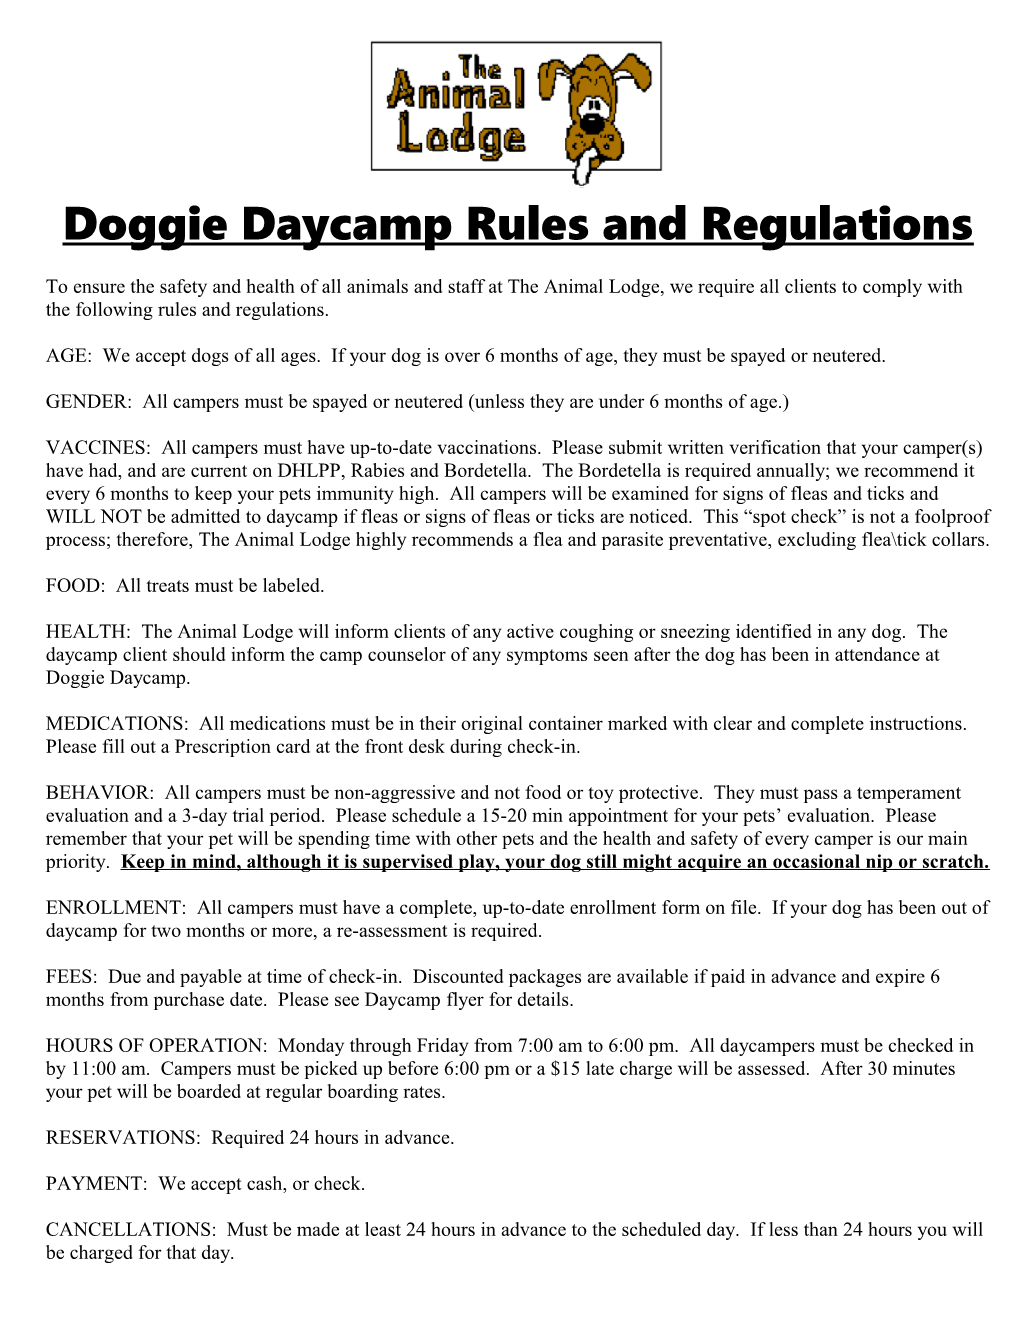 Doggie Daycamp Rules and Regulations